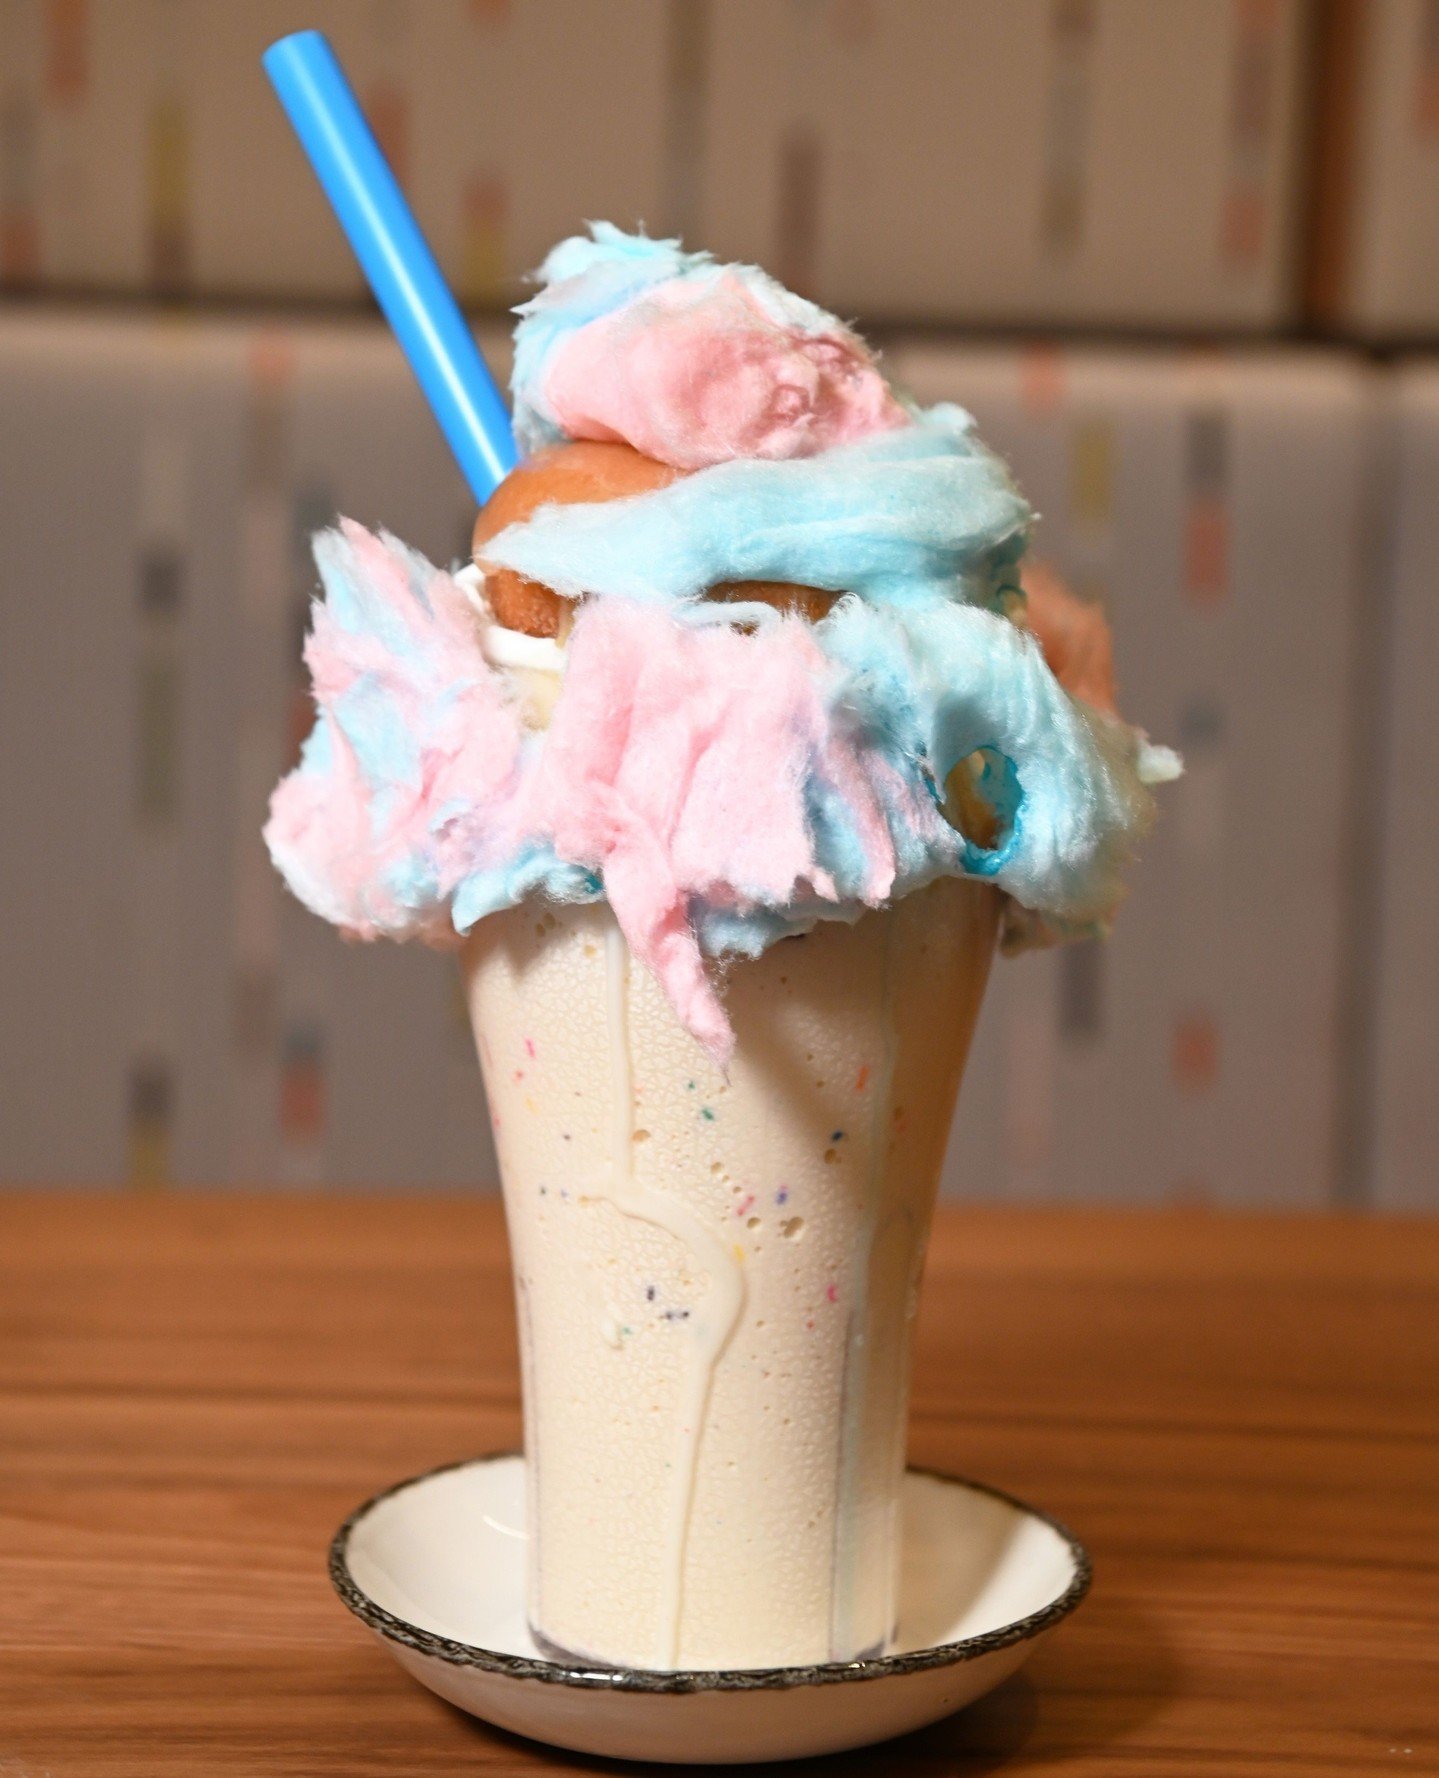 Sweets lovers - this one's for you! Our new Cotton Candy Milkshake is sure to satisfy your sweet tooth 🍬⁠
.⁠
.⁠
.⁠
#atcdiner #aroundtheclockdiner #diner #NJdiner #americandream #americandreammall #newopenings #newopeningsnj #breakfast #njdining #201